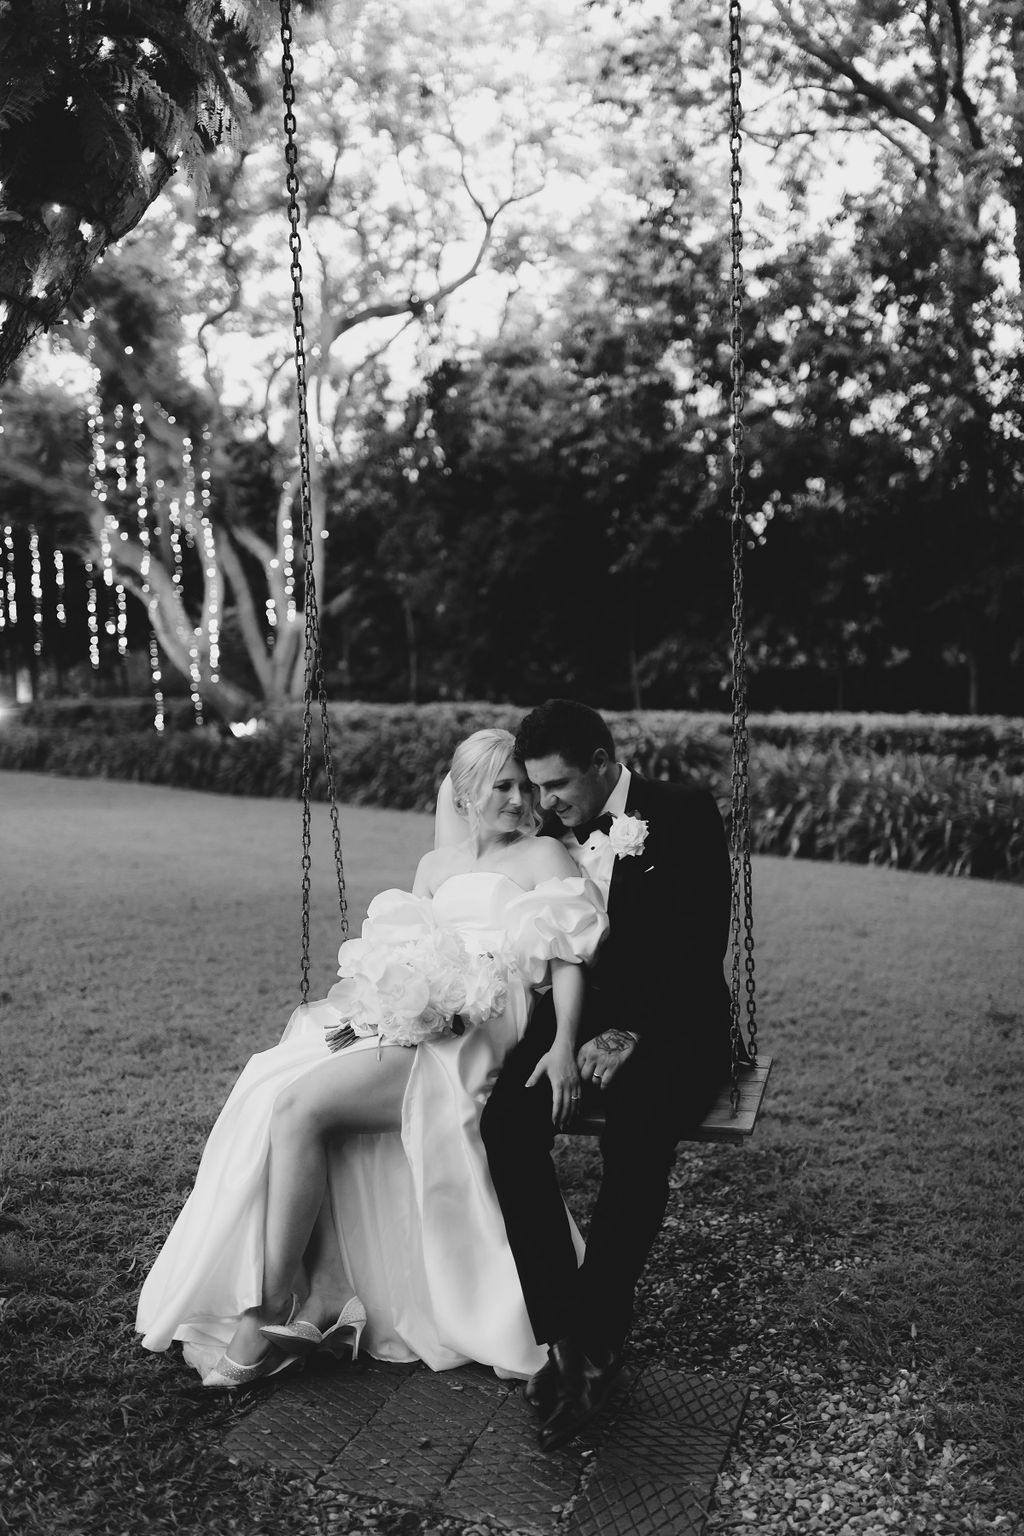 A bride and groom sit closely on a wooden swing in an outdoor setting. The bride, wearing a flowing gown, holds a bouquet and rests against the groom. The groom, dressed in a suit, relaxes next to her. The background features trees and string lights. (Black and white image).